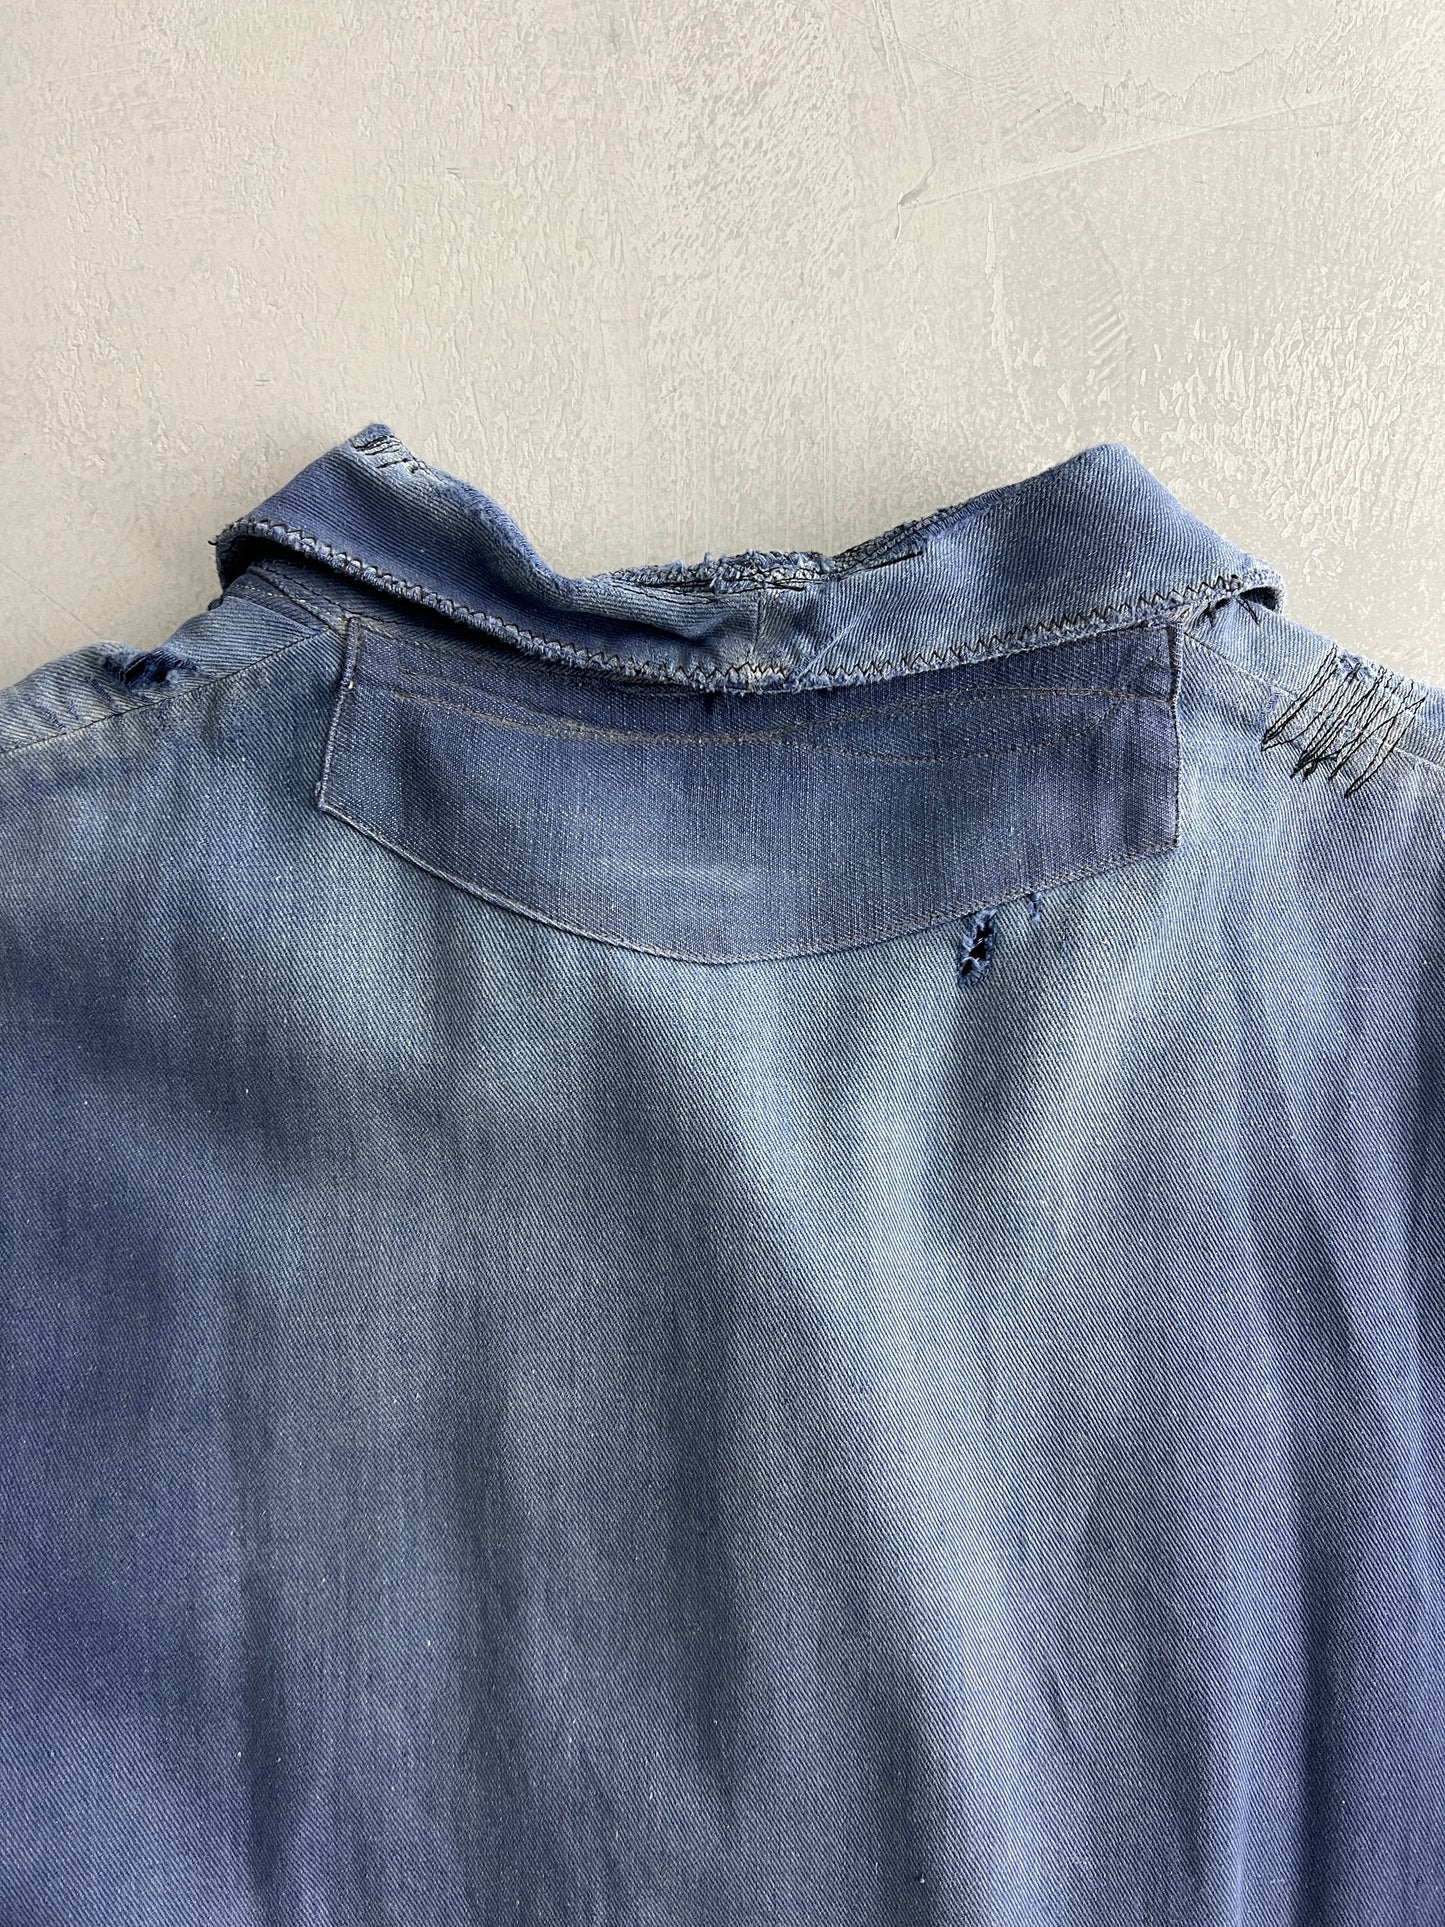 Heavily Repaired French Shop Coat [M]